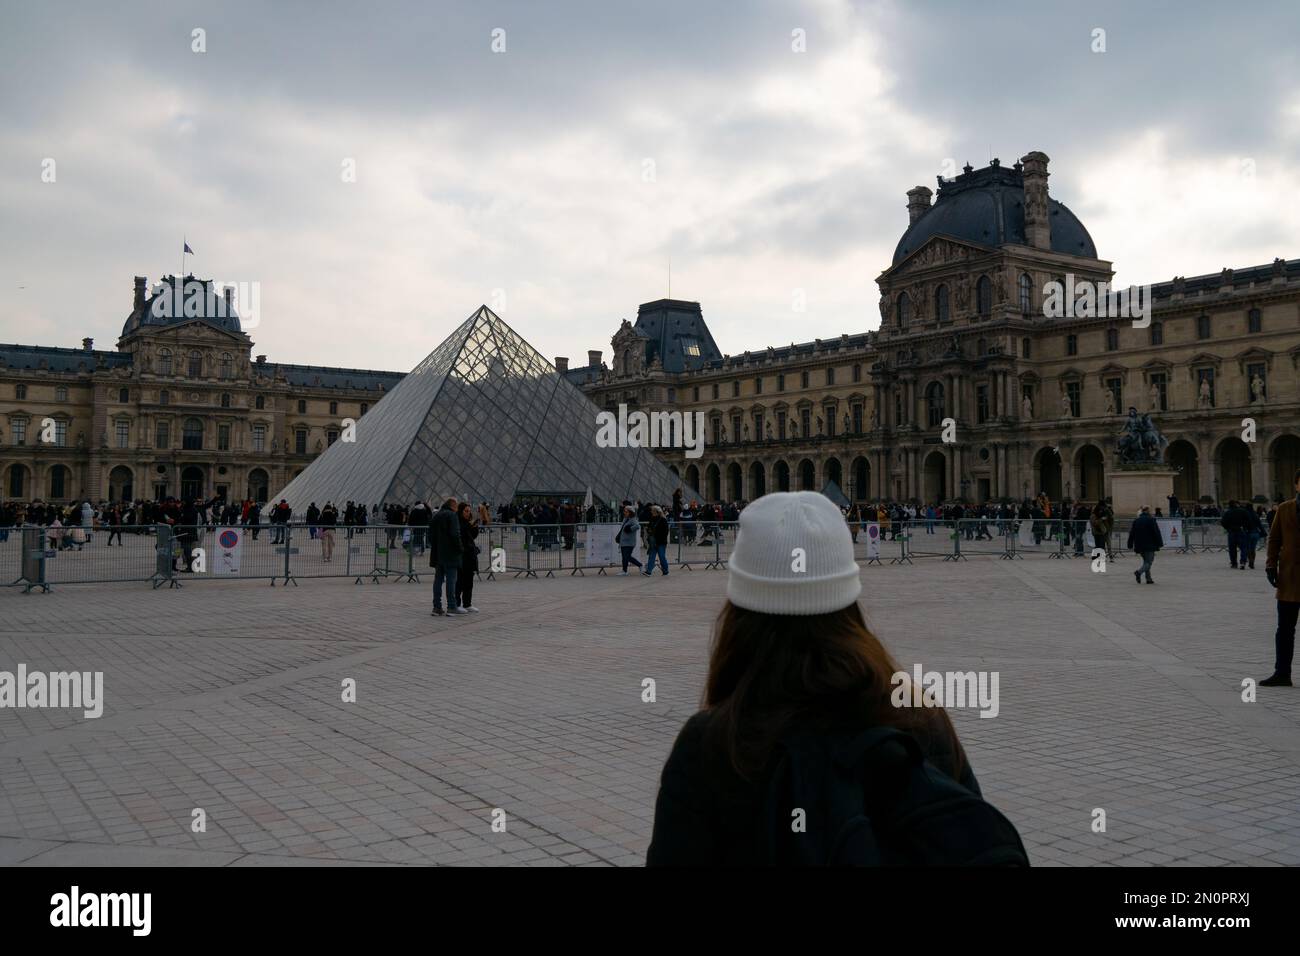 Pirâmide du Louvre. Le Louvre is the world's most-visited museum, glass pirâmide. Visiting Paris in January with cold weather on Cloudy days. Tourists. Stock Photo